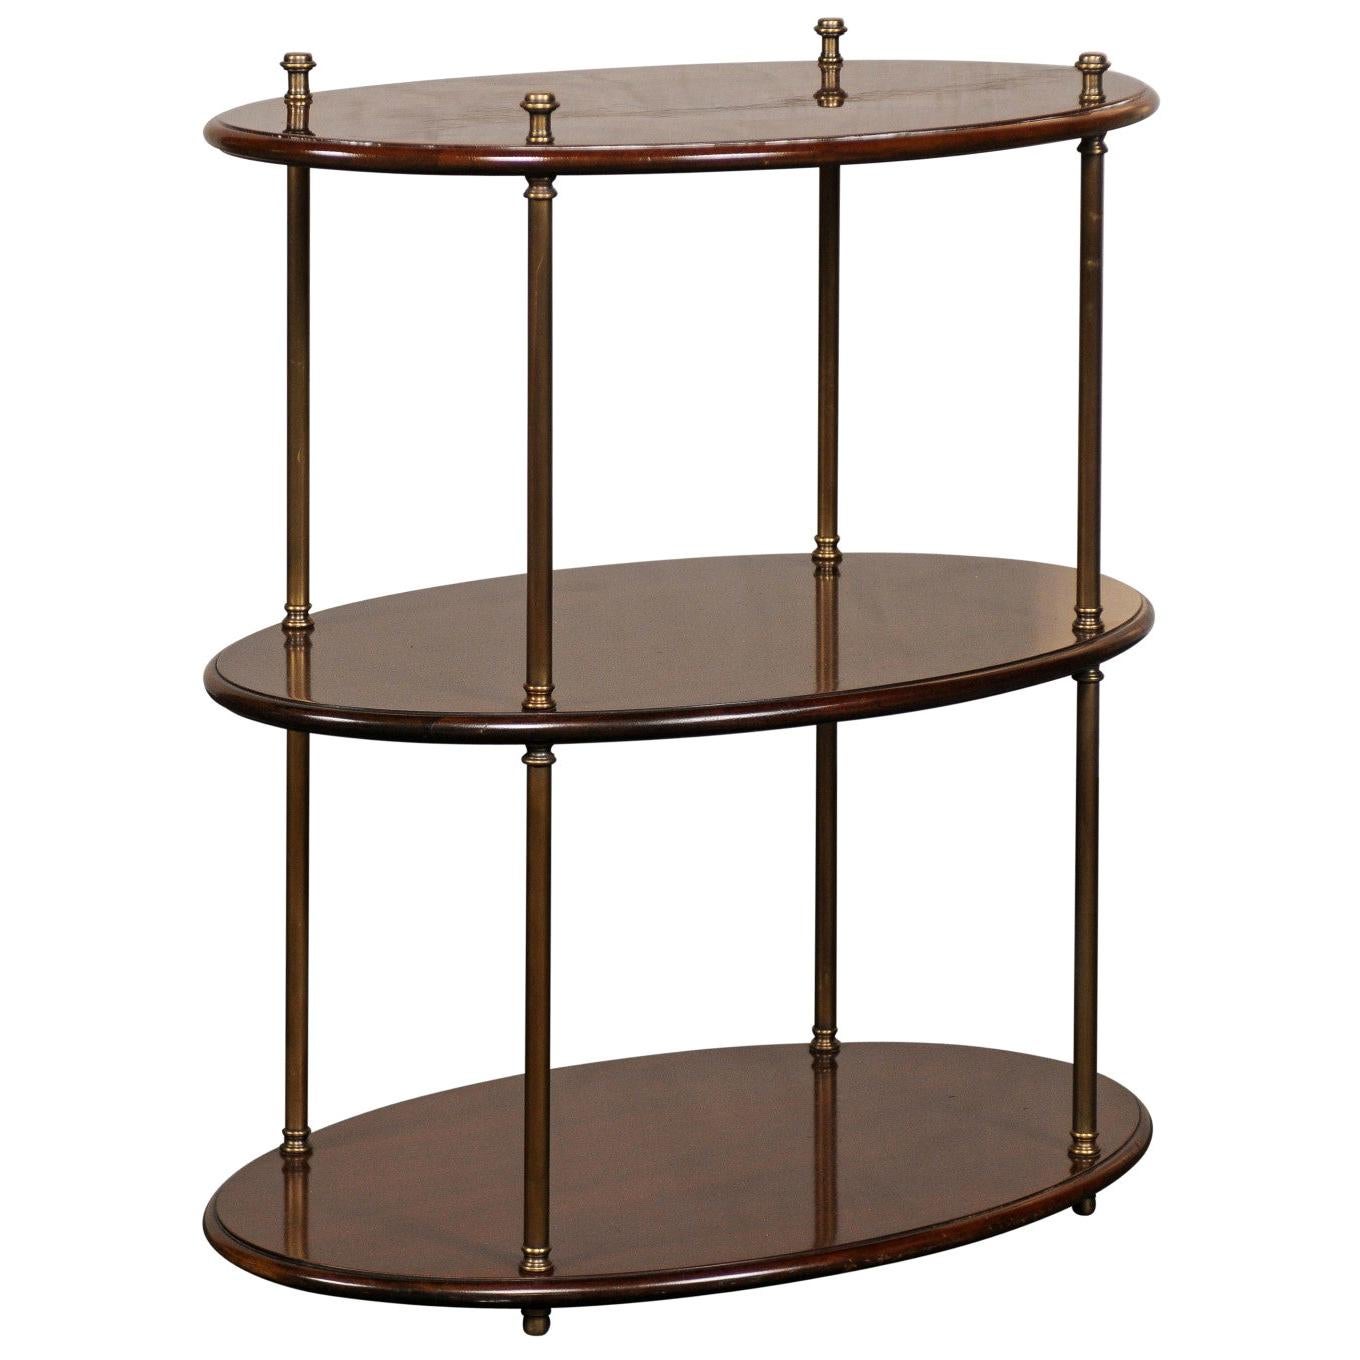 19th-20th Century English Mahogany & Brass Three-Tier Oval Étagère For Sale